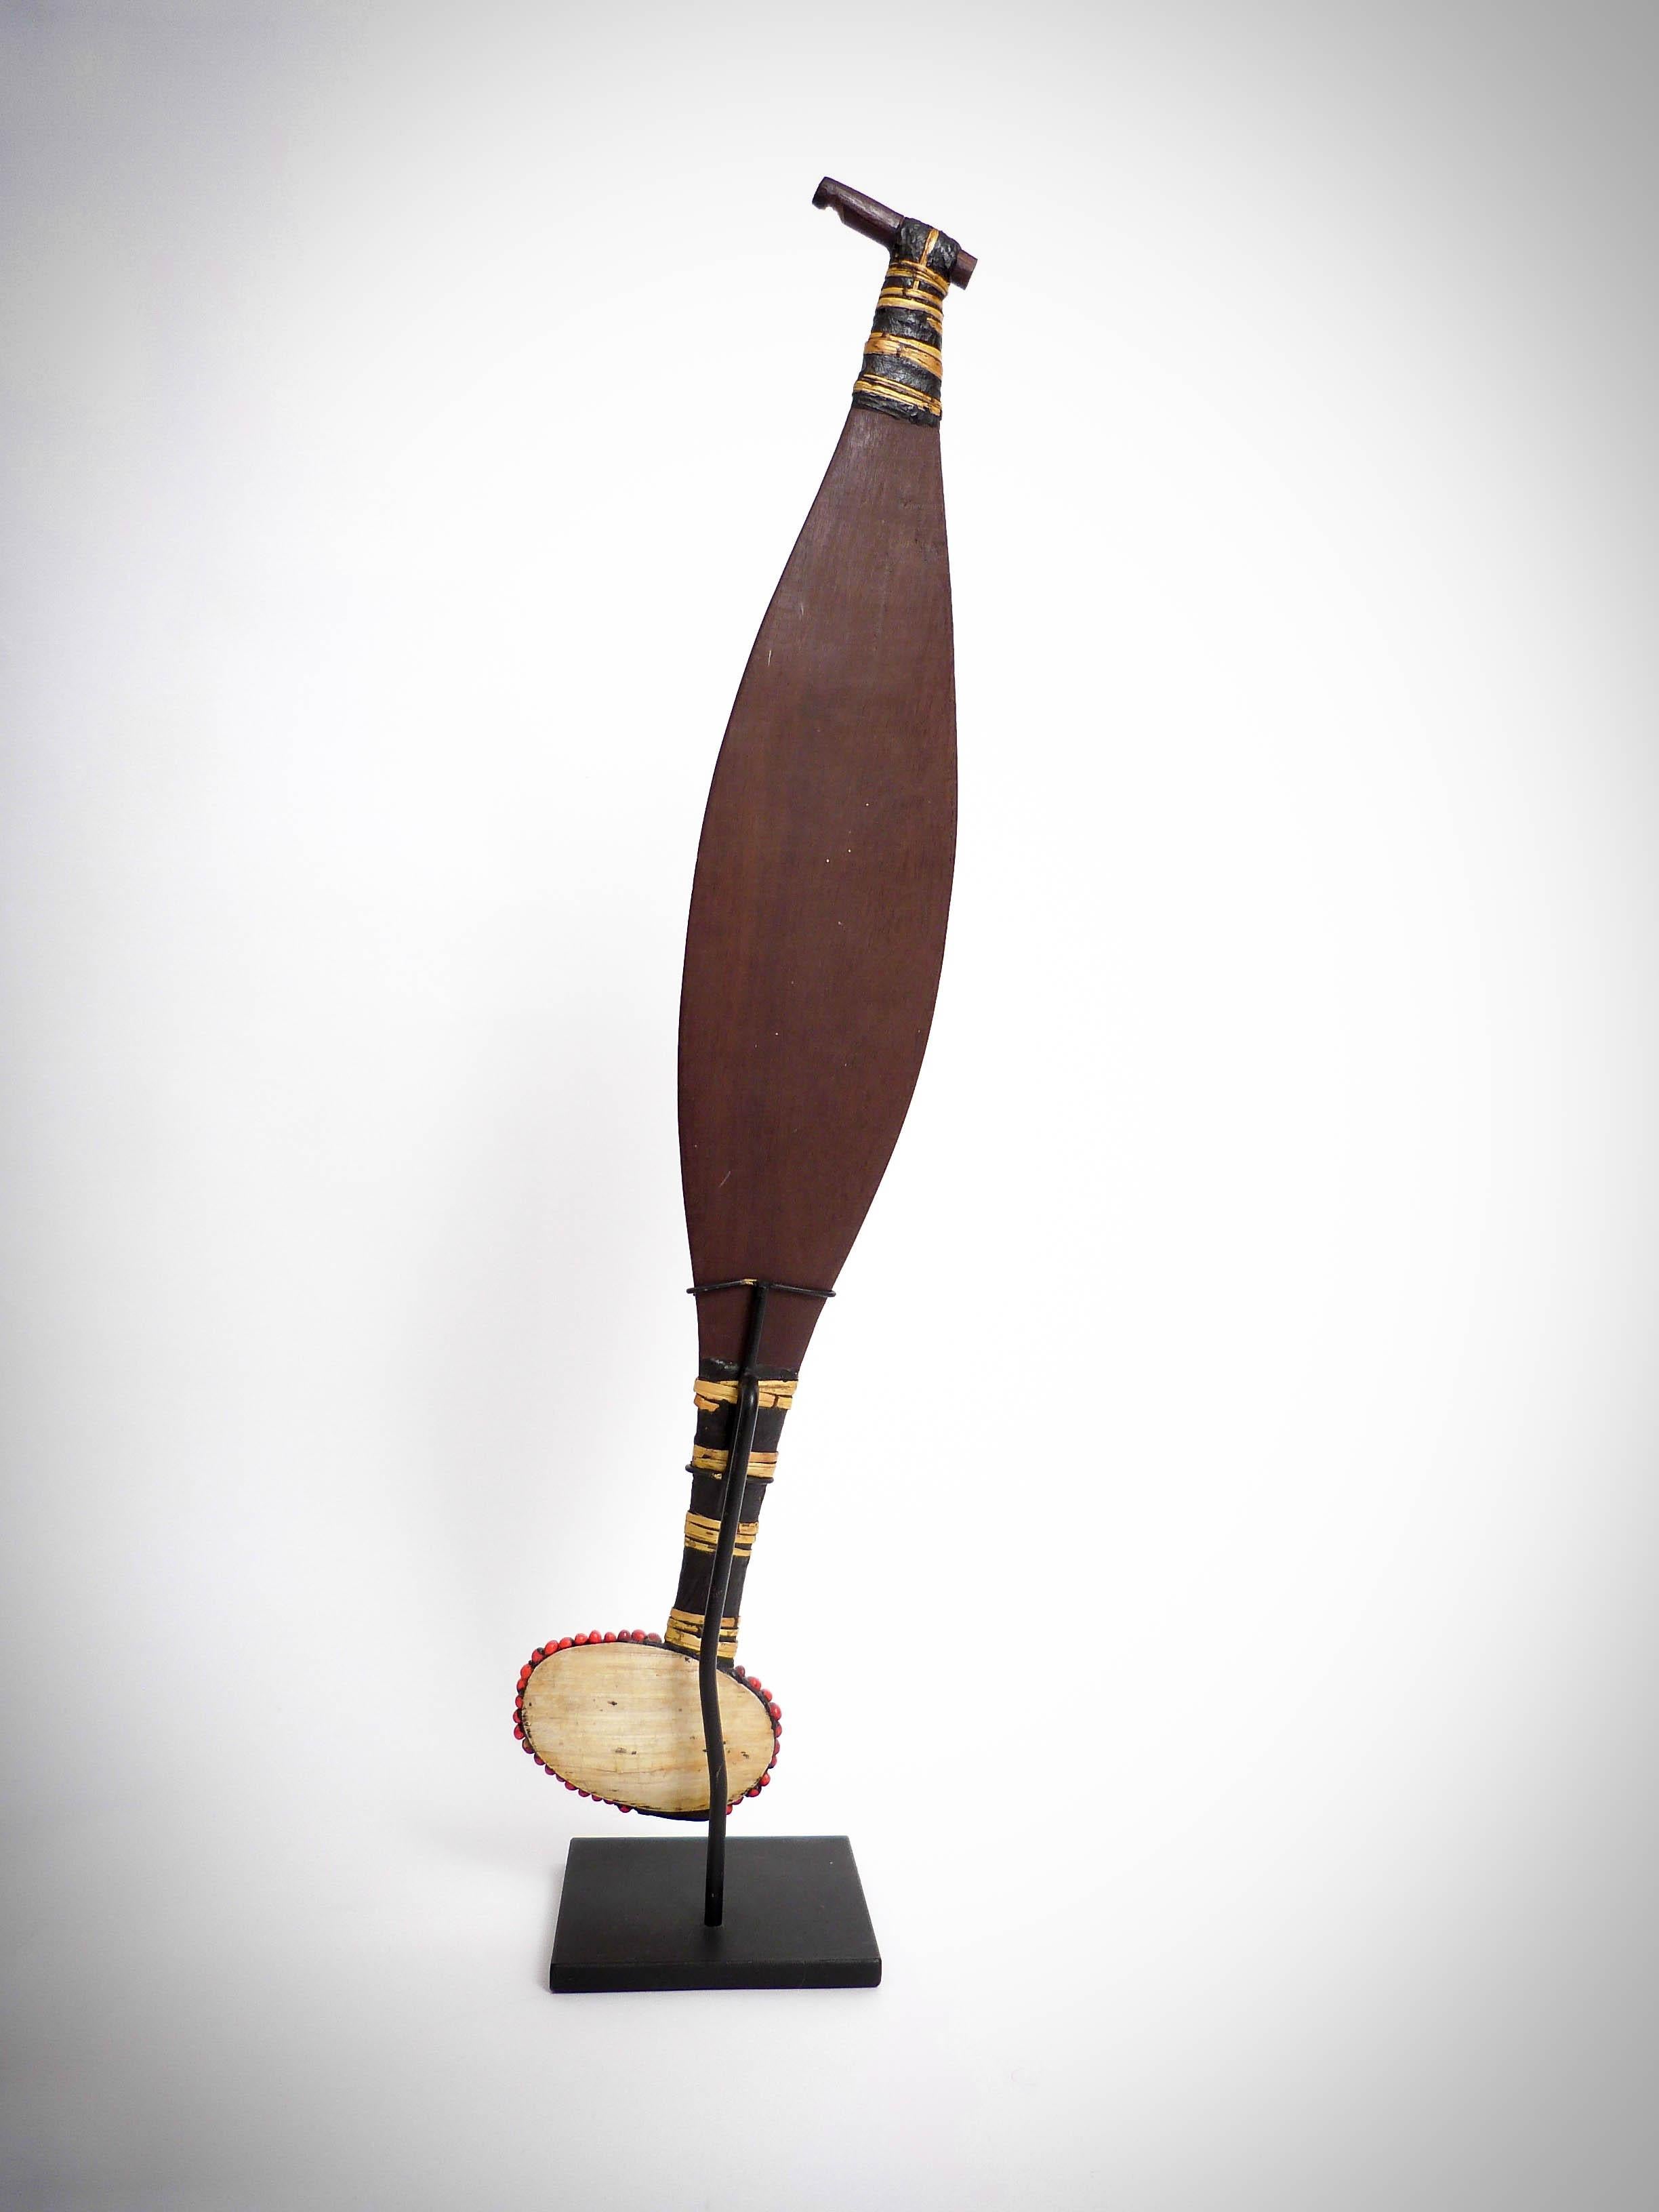 Aboriginal spearthrower carved and incised wood, abrus seeds, cane, shell and gum resin. 62.5cms long, 10.5cms wide. Aboriginal tribes, north Australia, Queensland.